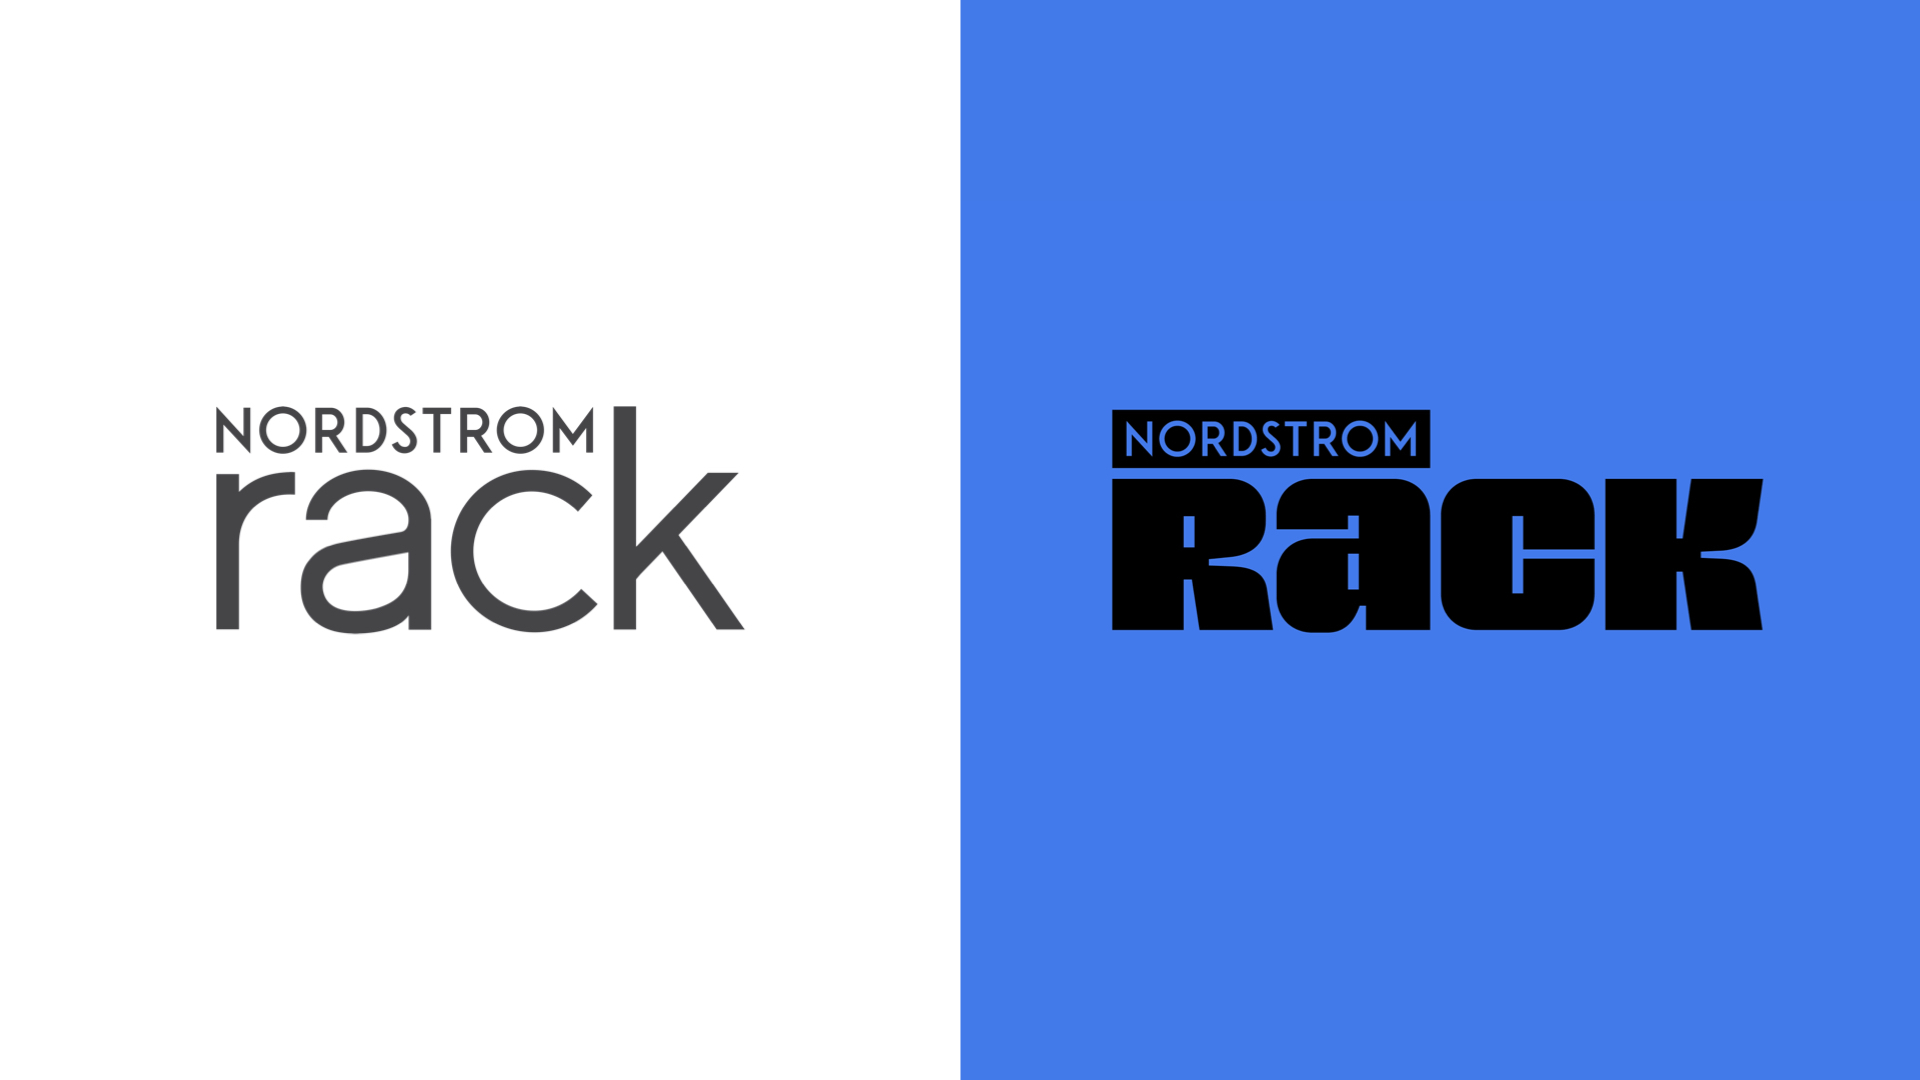 Now There's a Throw-Rack! Nordstrom Rack Rebrand Explored